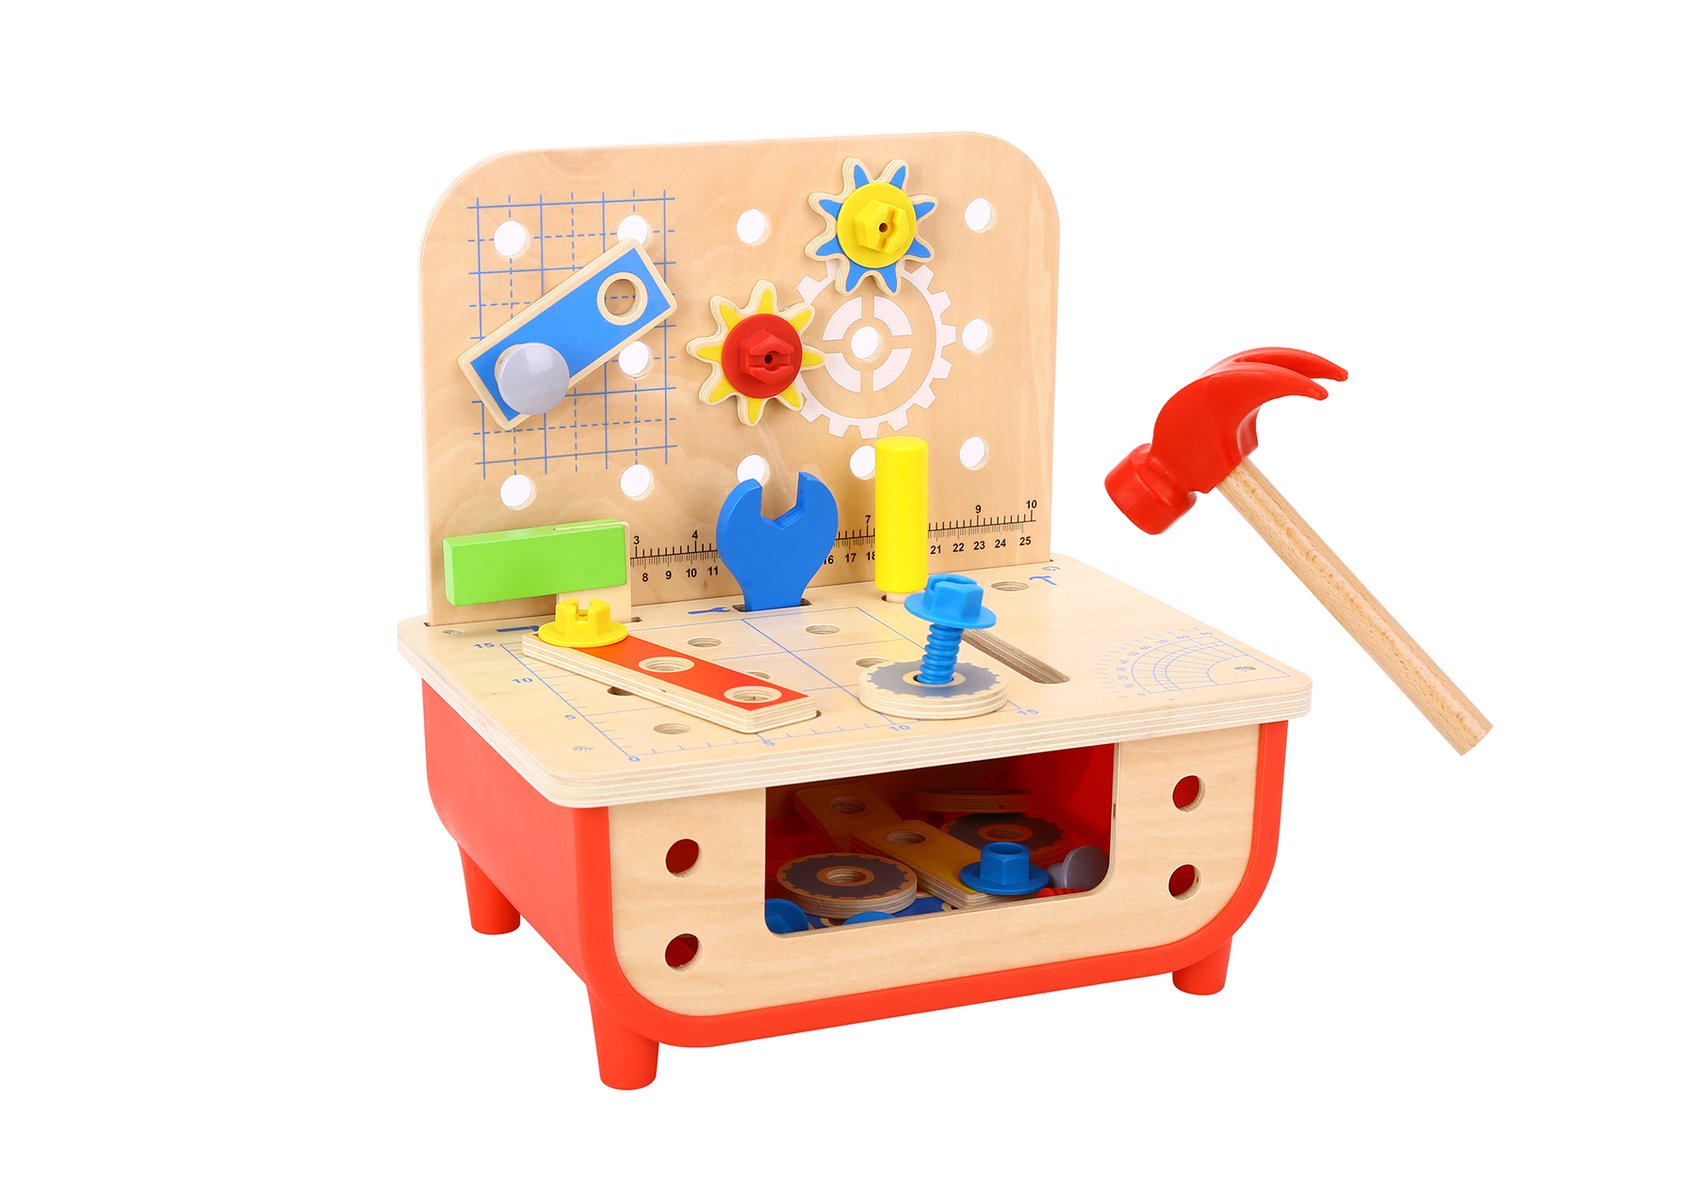 Tooky Toy Work Bench